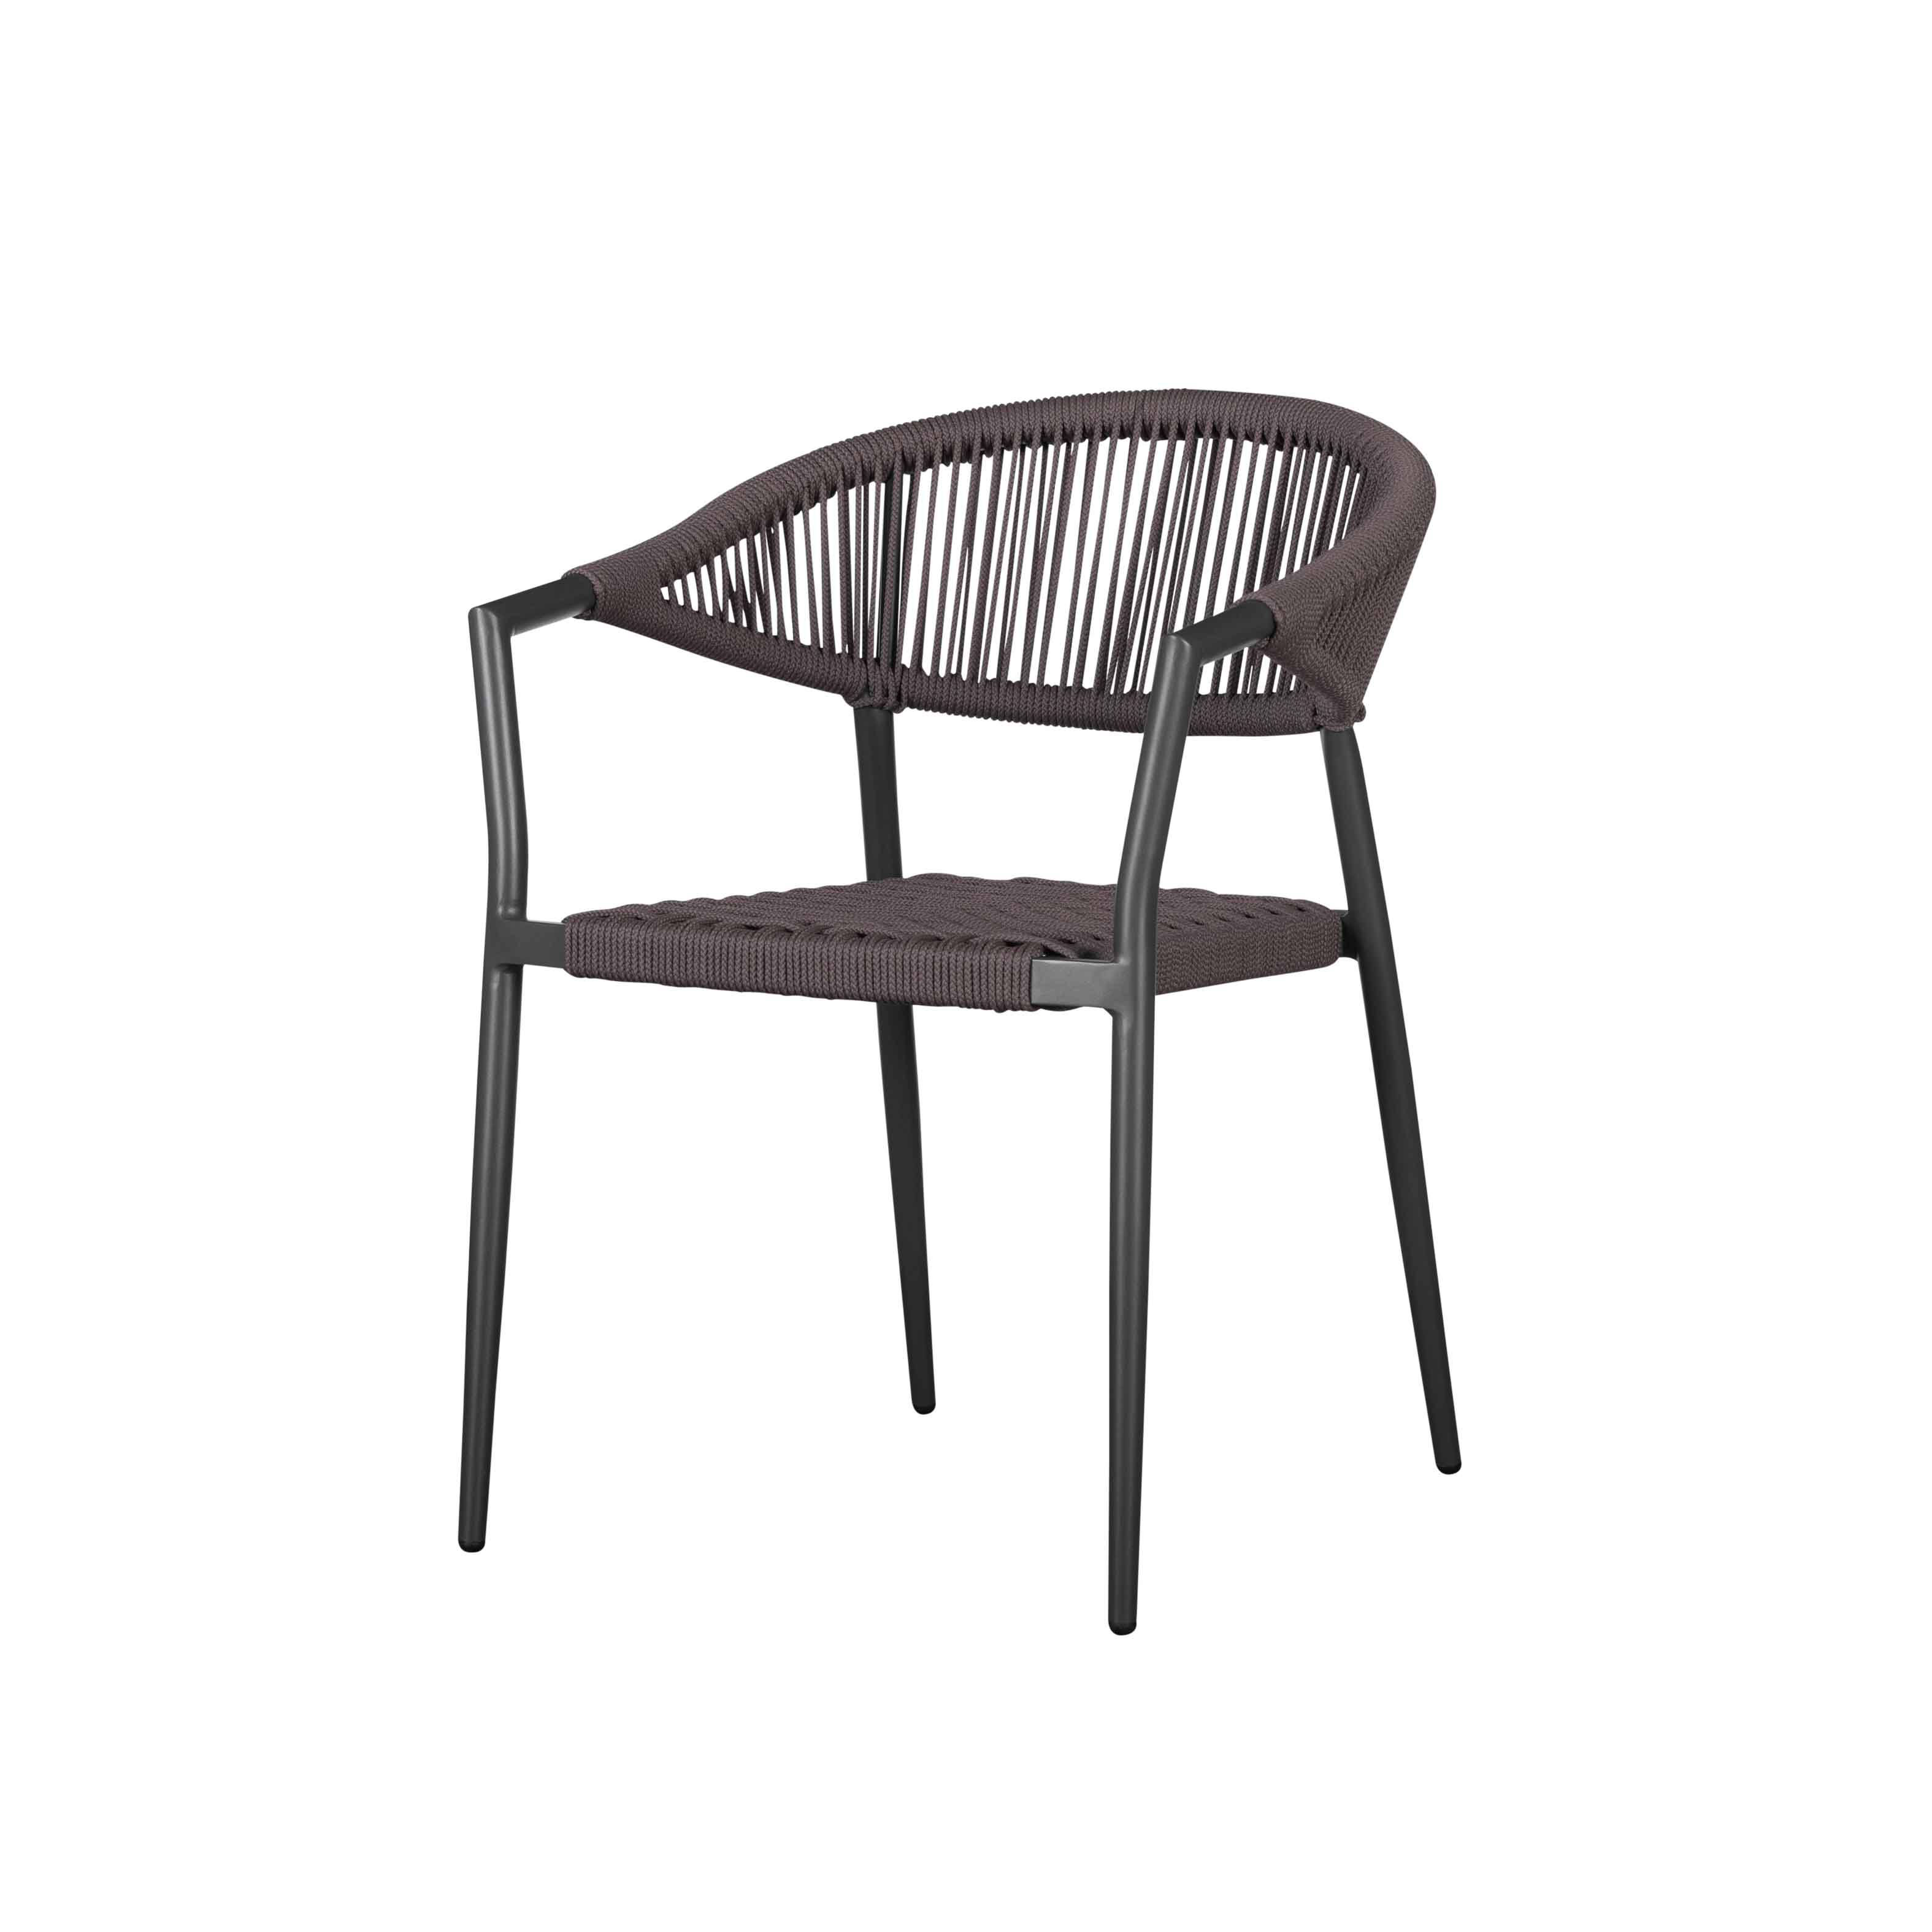 Camila rope dining chair S1